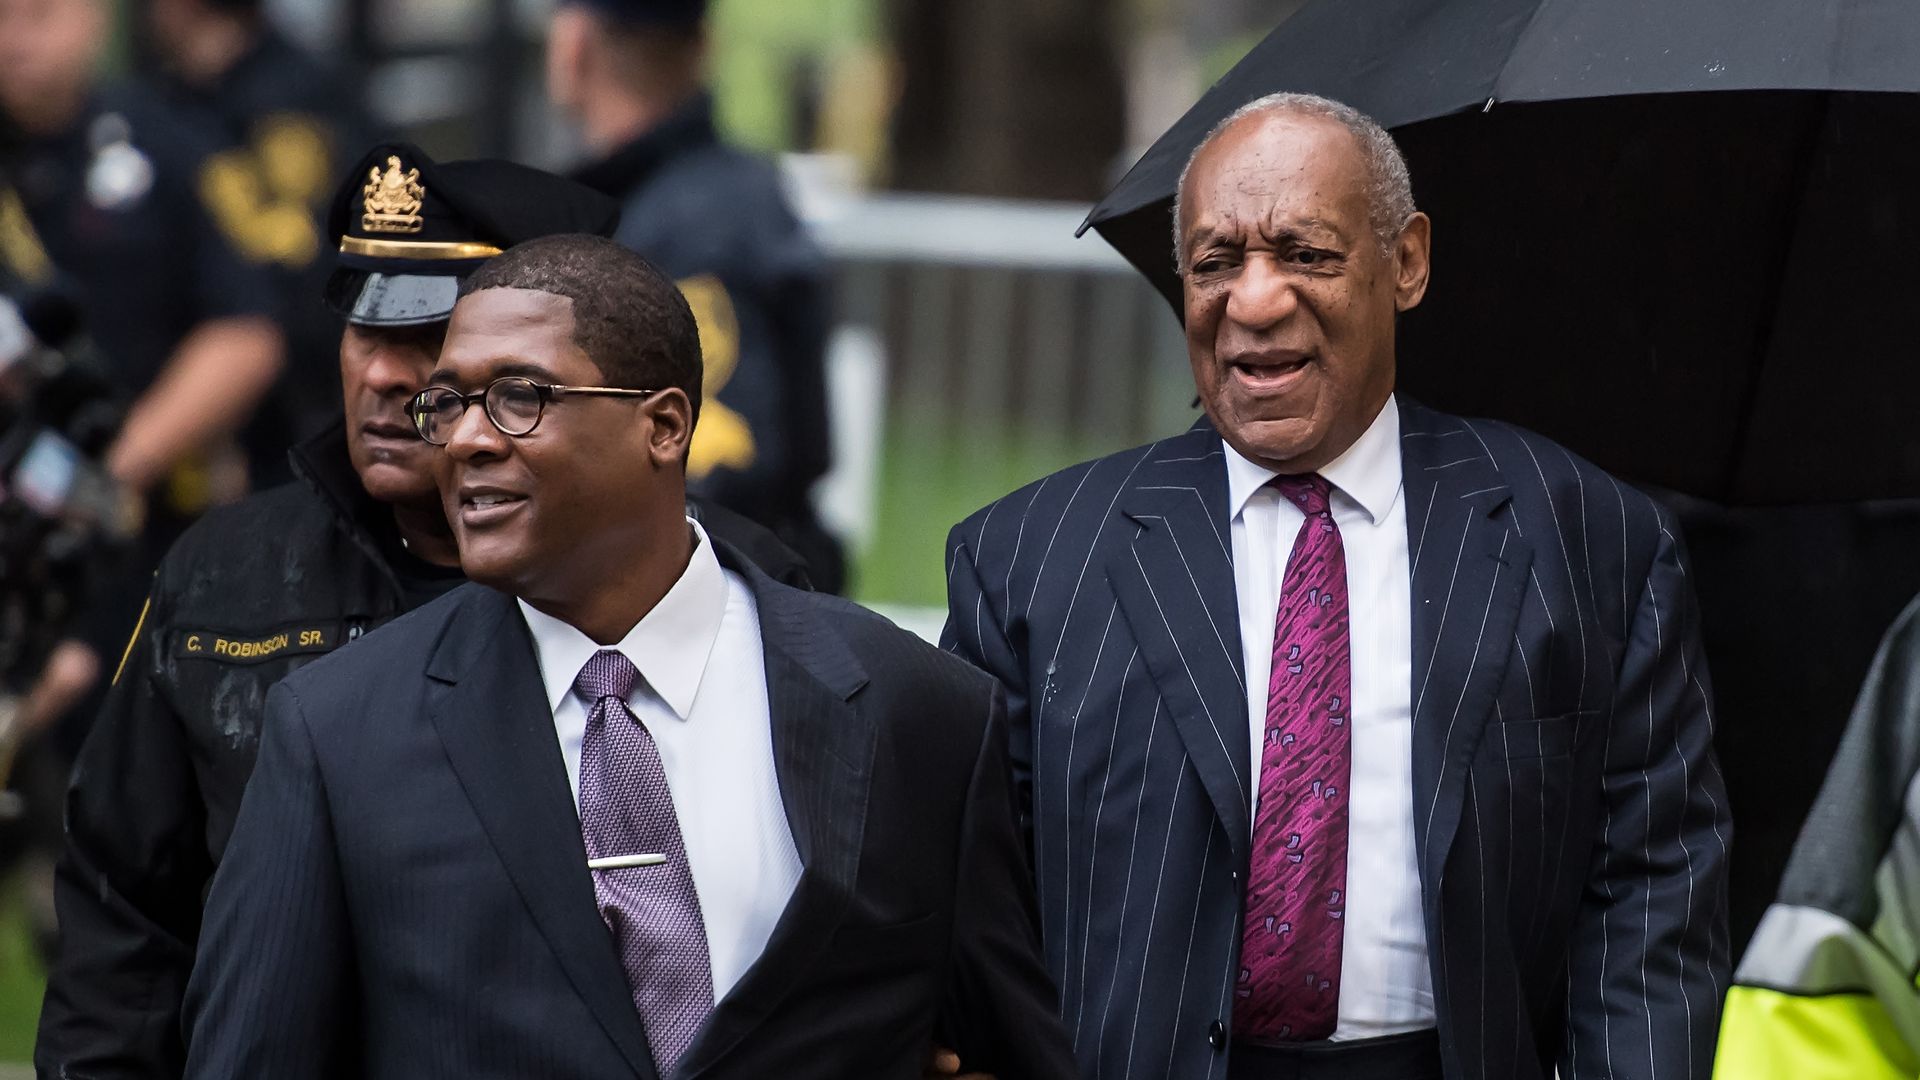 Bill Cosby arrives for sentencing for his sexual assault trial at the Montgomery County Courthouse on September 25, 2018